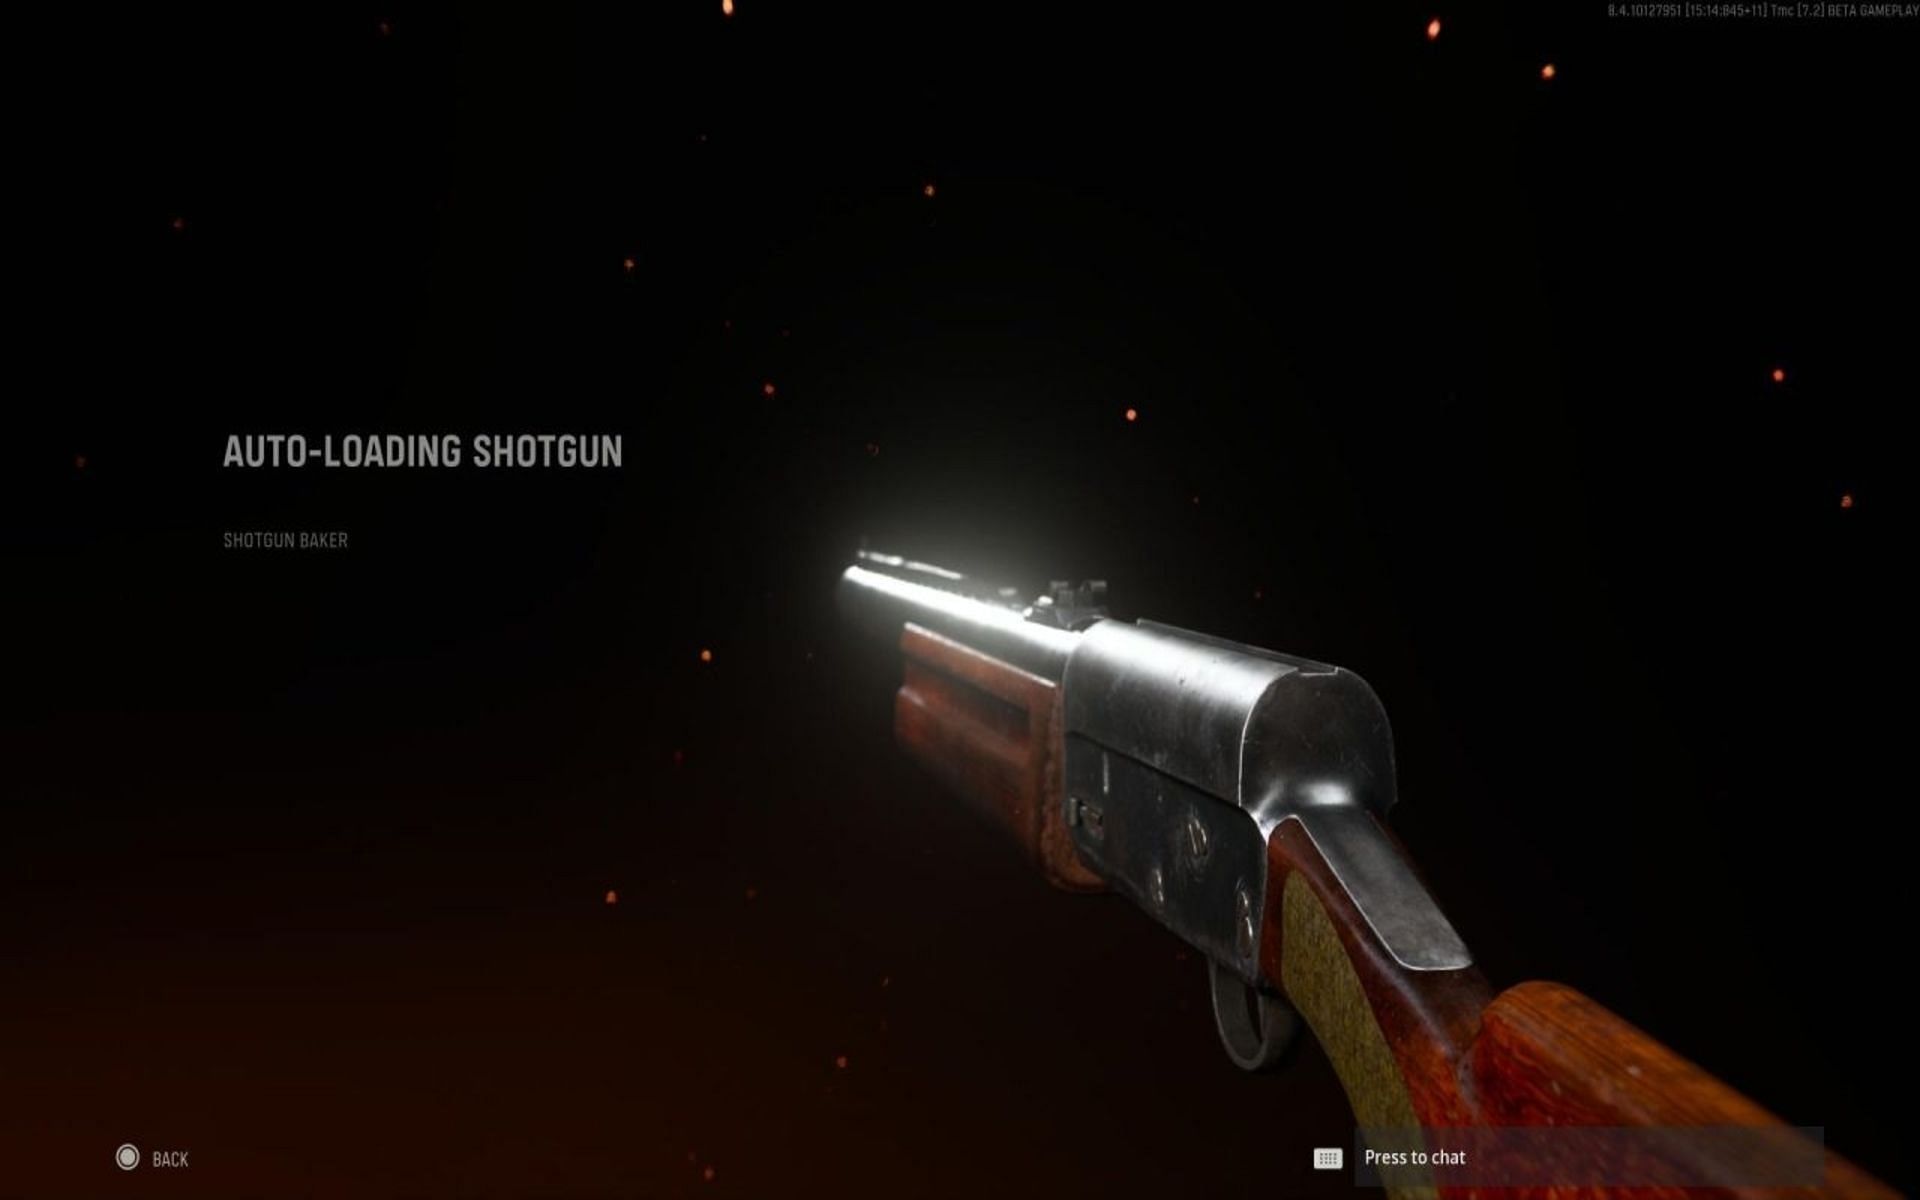 The Auto-Loading Shotgun also suffers from low damage (Image via Activision)